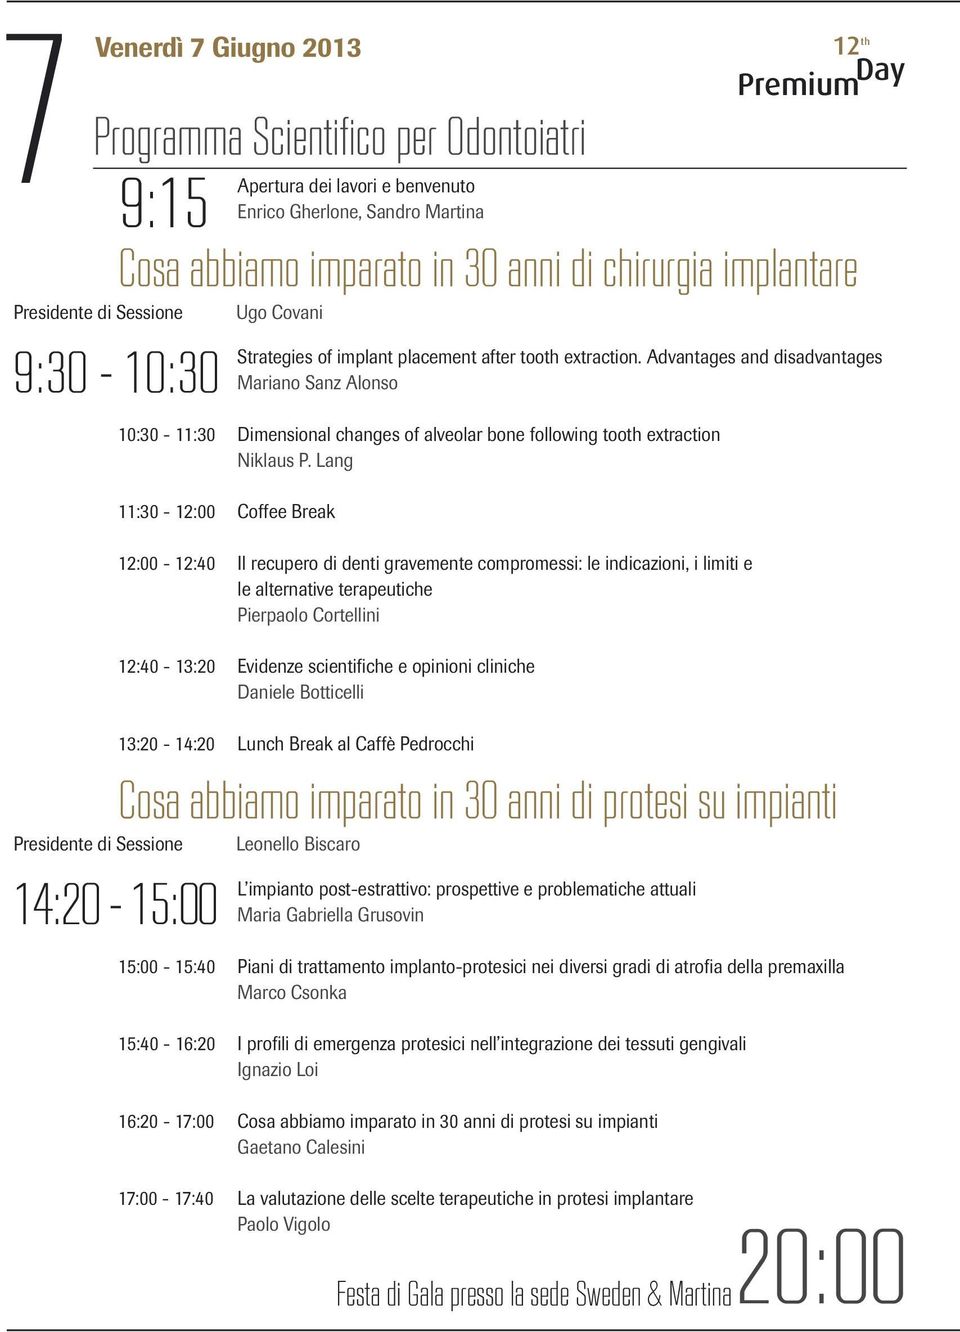 Advantages and disadvantages Mariano Sanz Alonso 10:30-11:30 Dimensional changes of alveolar bone following tooth extraction Niklaus P.